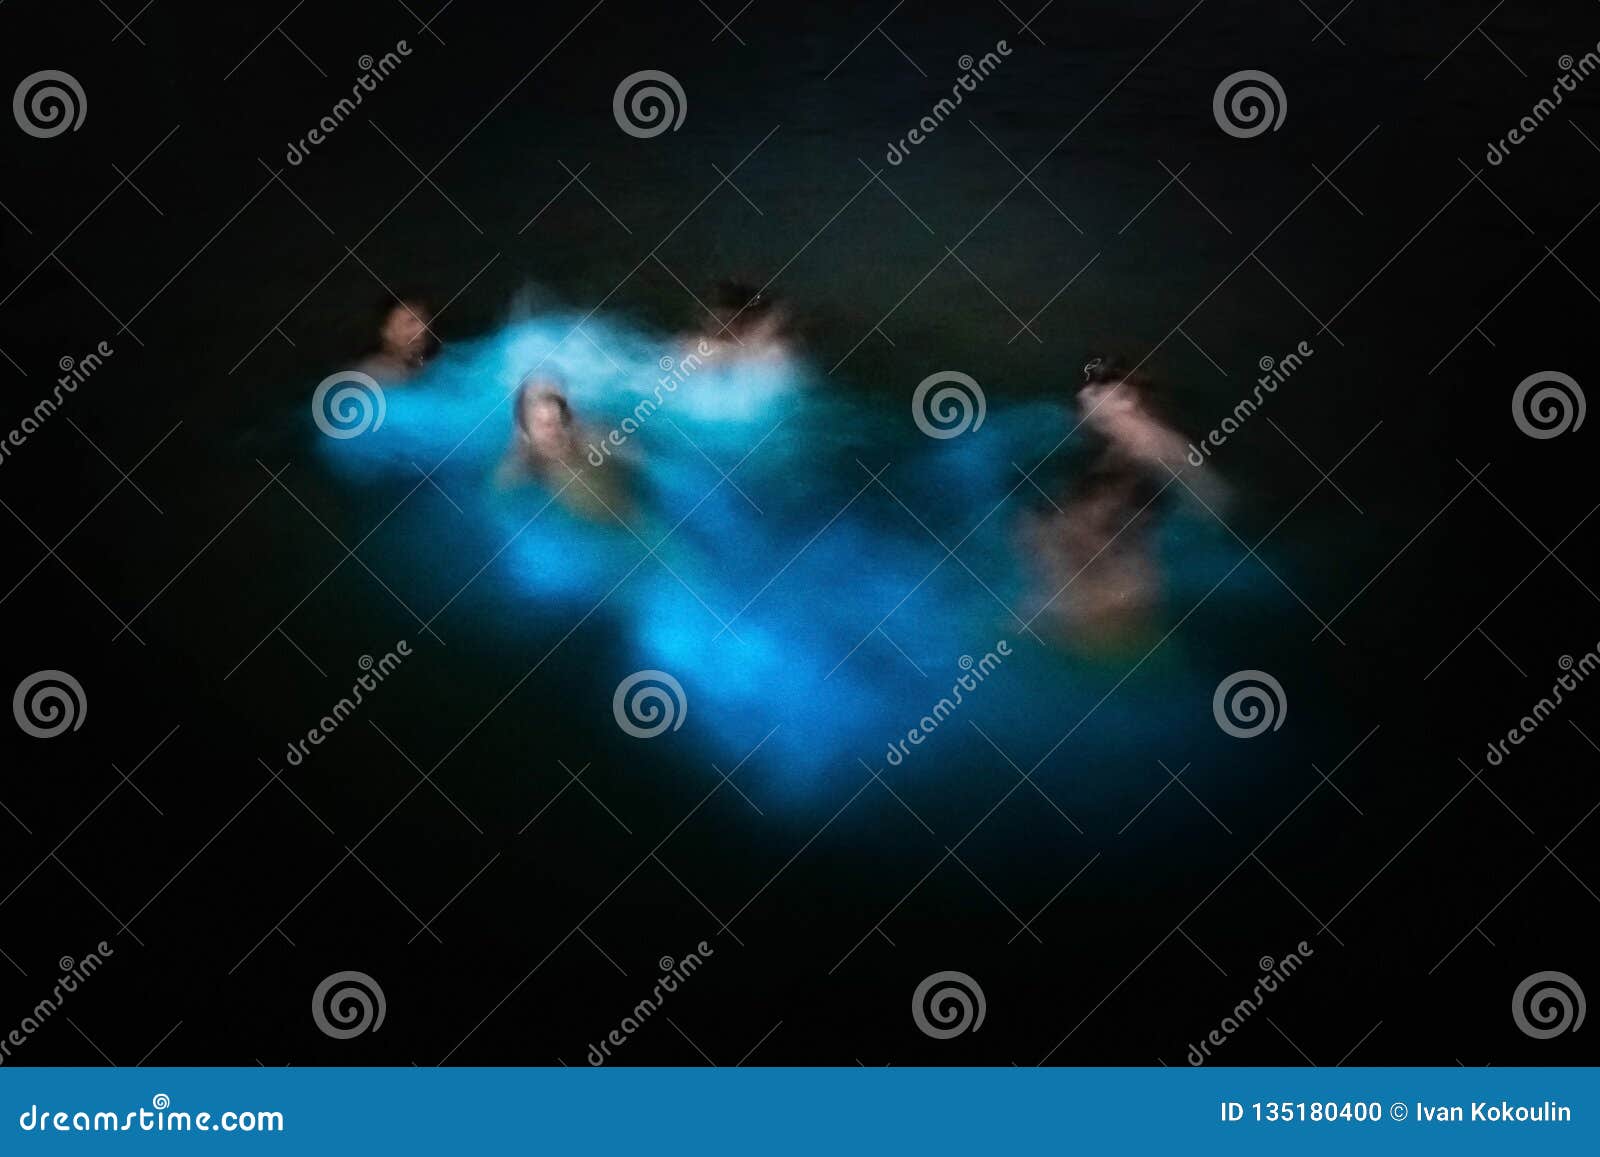 blurred group of people swimming in glowing waters